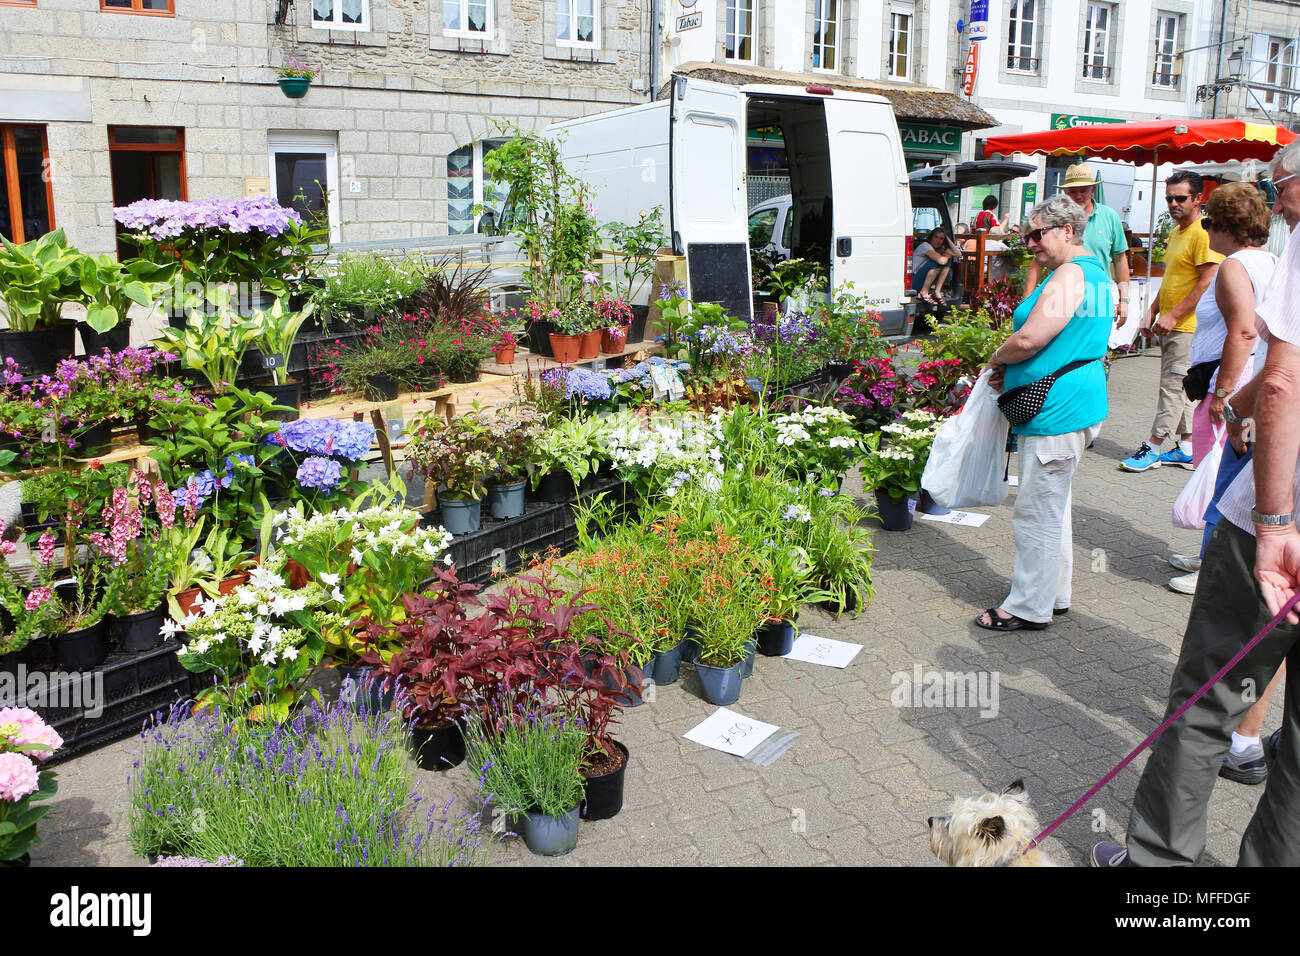 A plant and flower street market stall, Huelgoat, Brittany, France - John Gollop Stock Photo